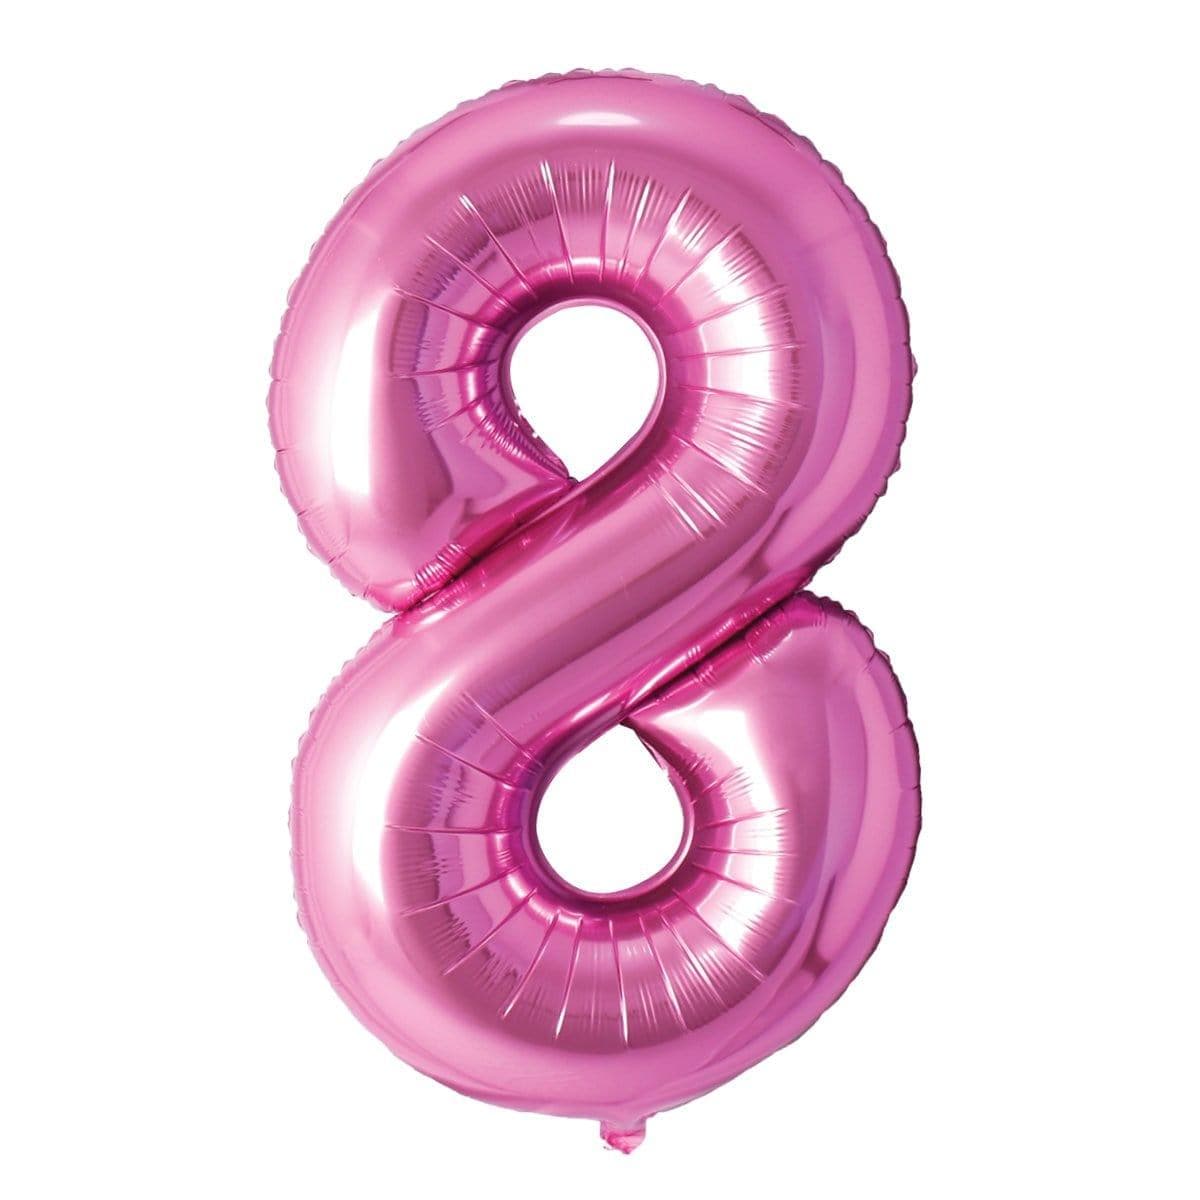 Buy Balloons Pink Number 8 Foil Balloon, 34 Inches sold at Party Expert